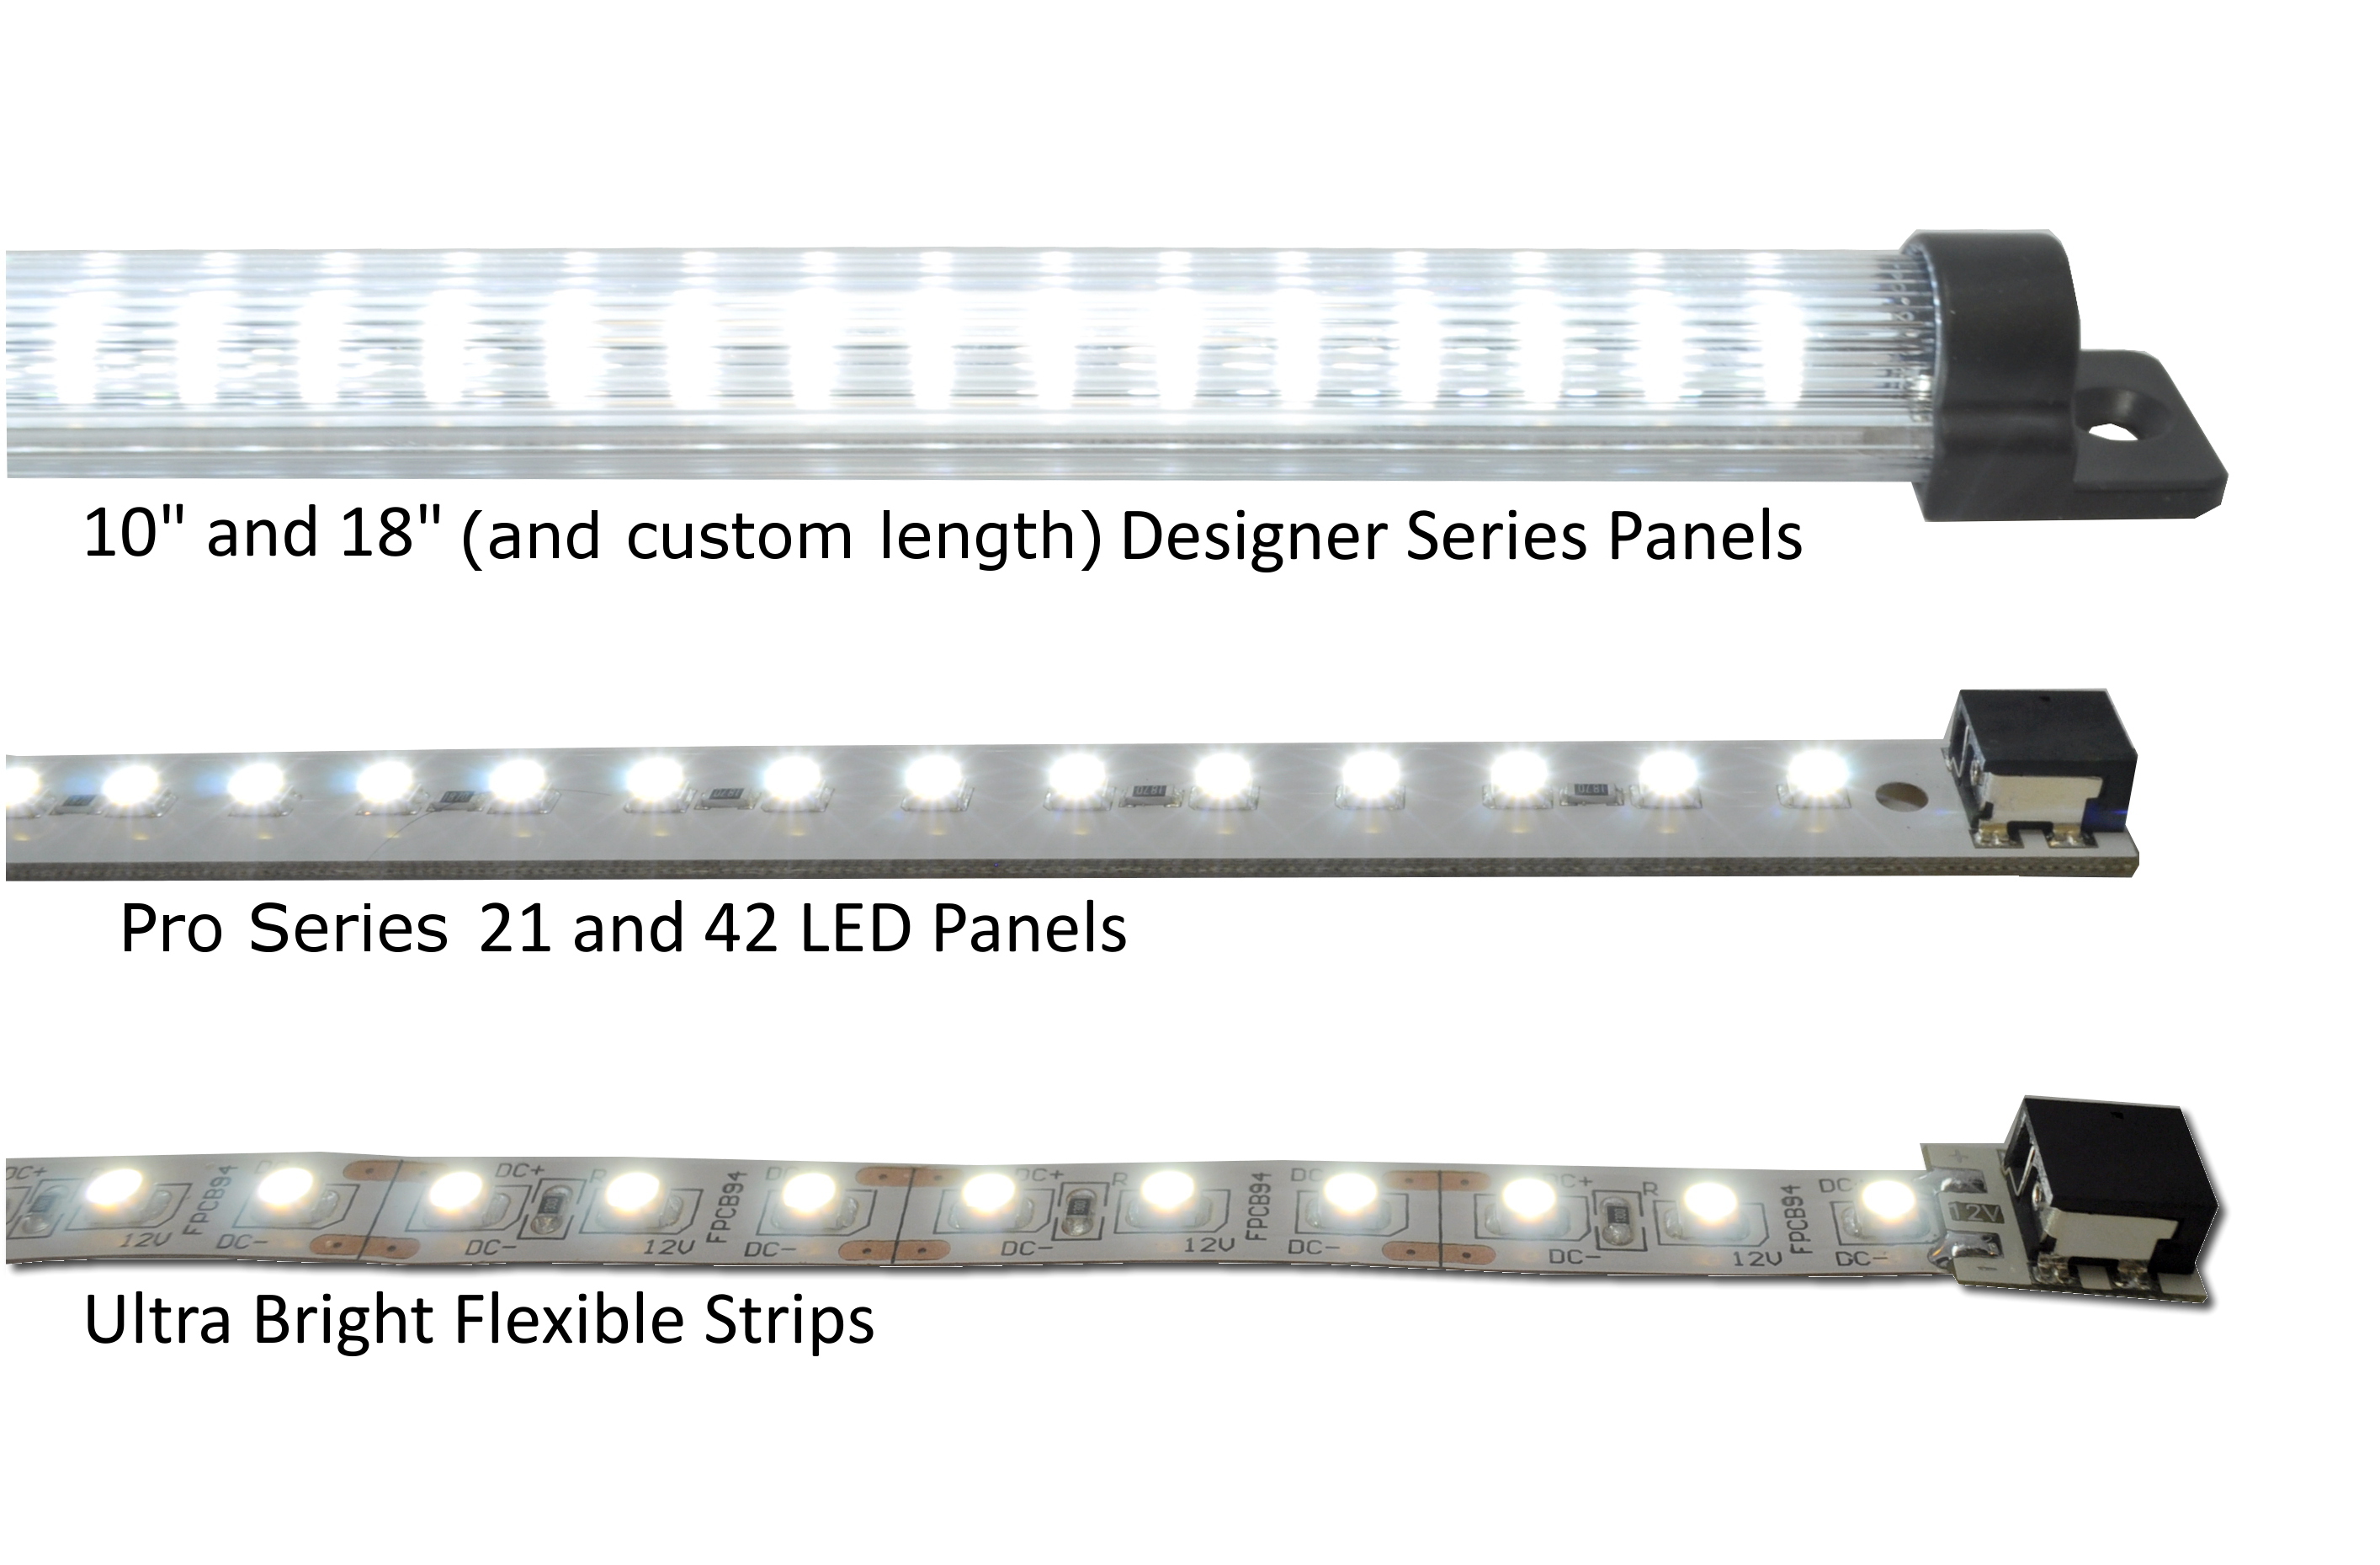 comparison of panels and flexible strips